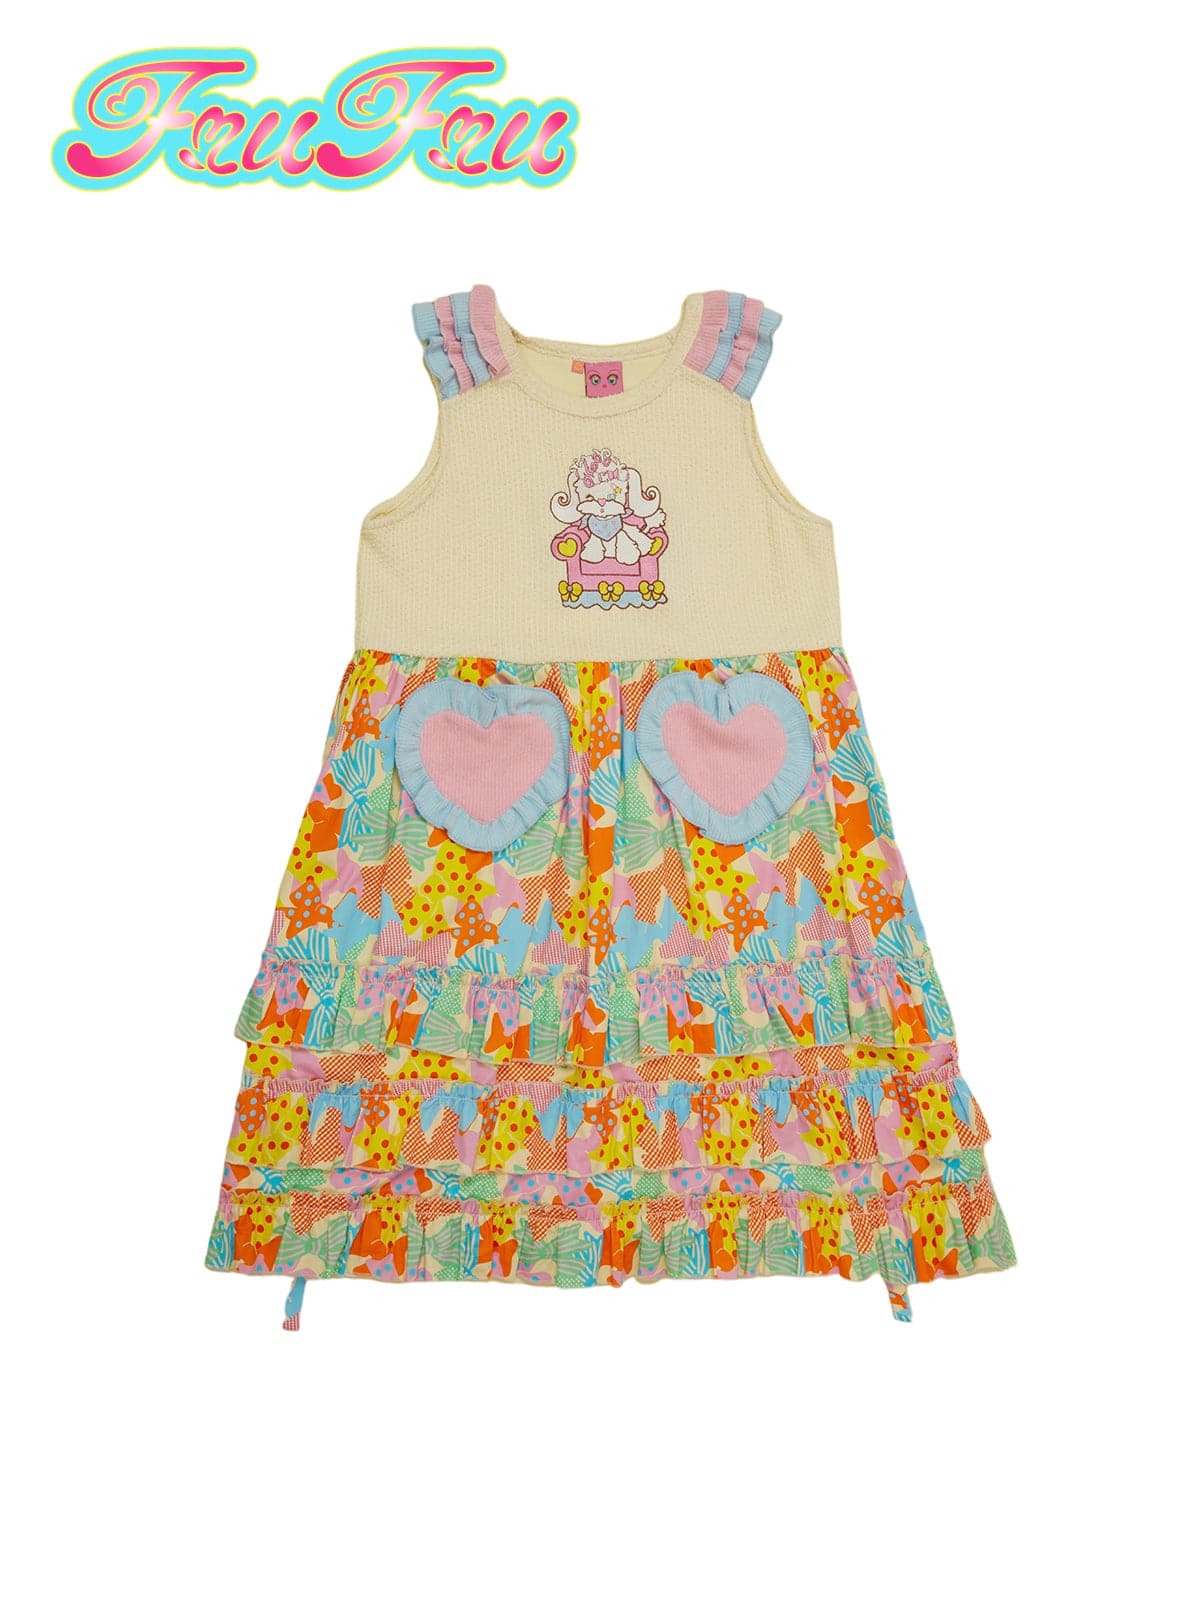 Cute Knitted Patchwork Dress With Embroidery Print - chiclara